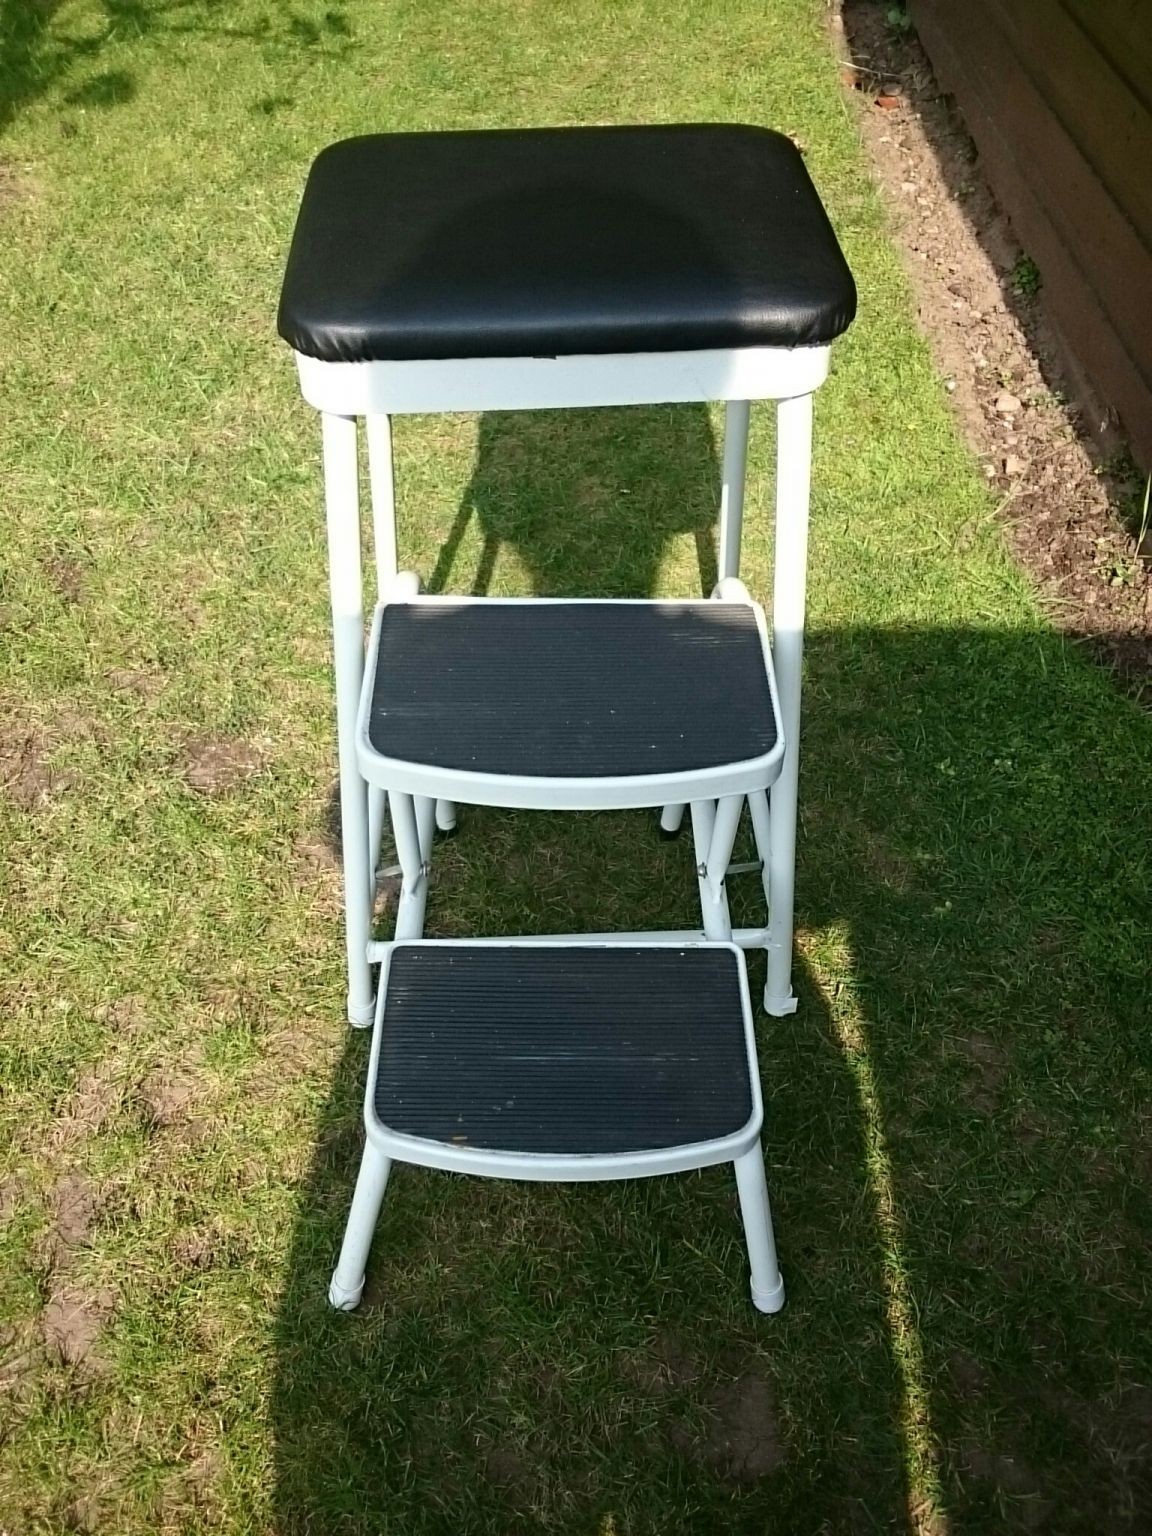 Stool step ladder with padded seat in ng3 gedling for